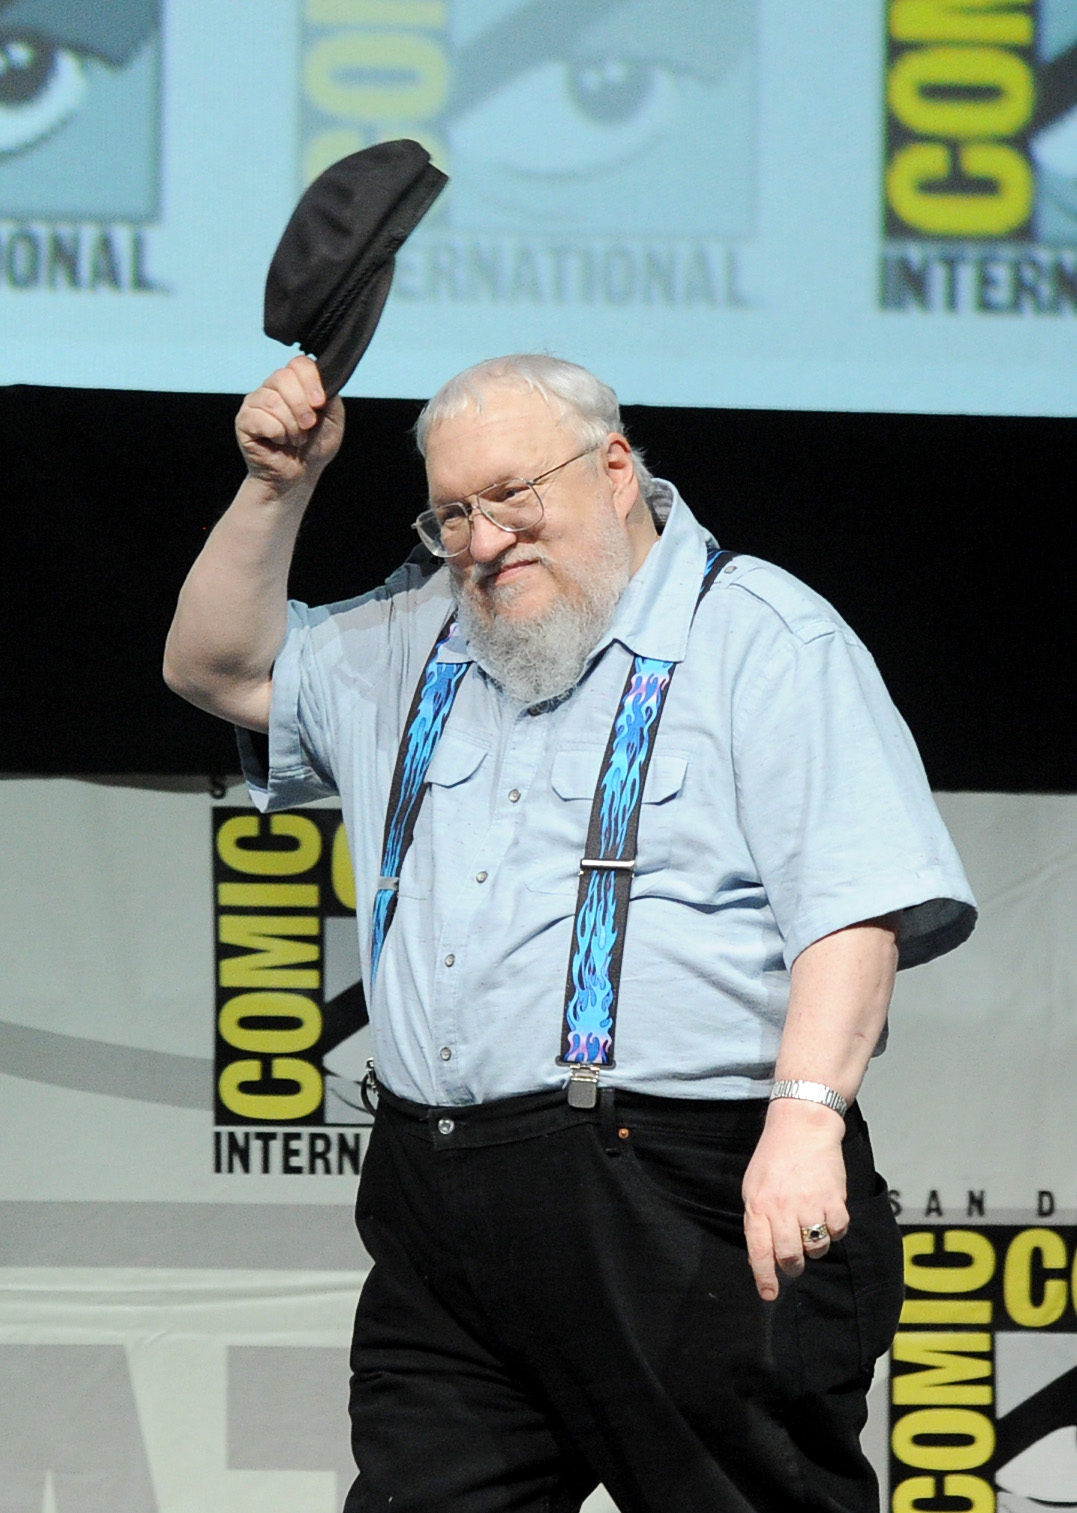 Writer George R.R. Martin speaks onstage during the "Game Of Thrones" panel during Comic-Con International 2013 at the San Diego Convention Center. (Kevin Winter—Getty Images)